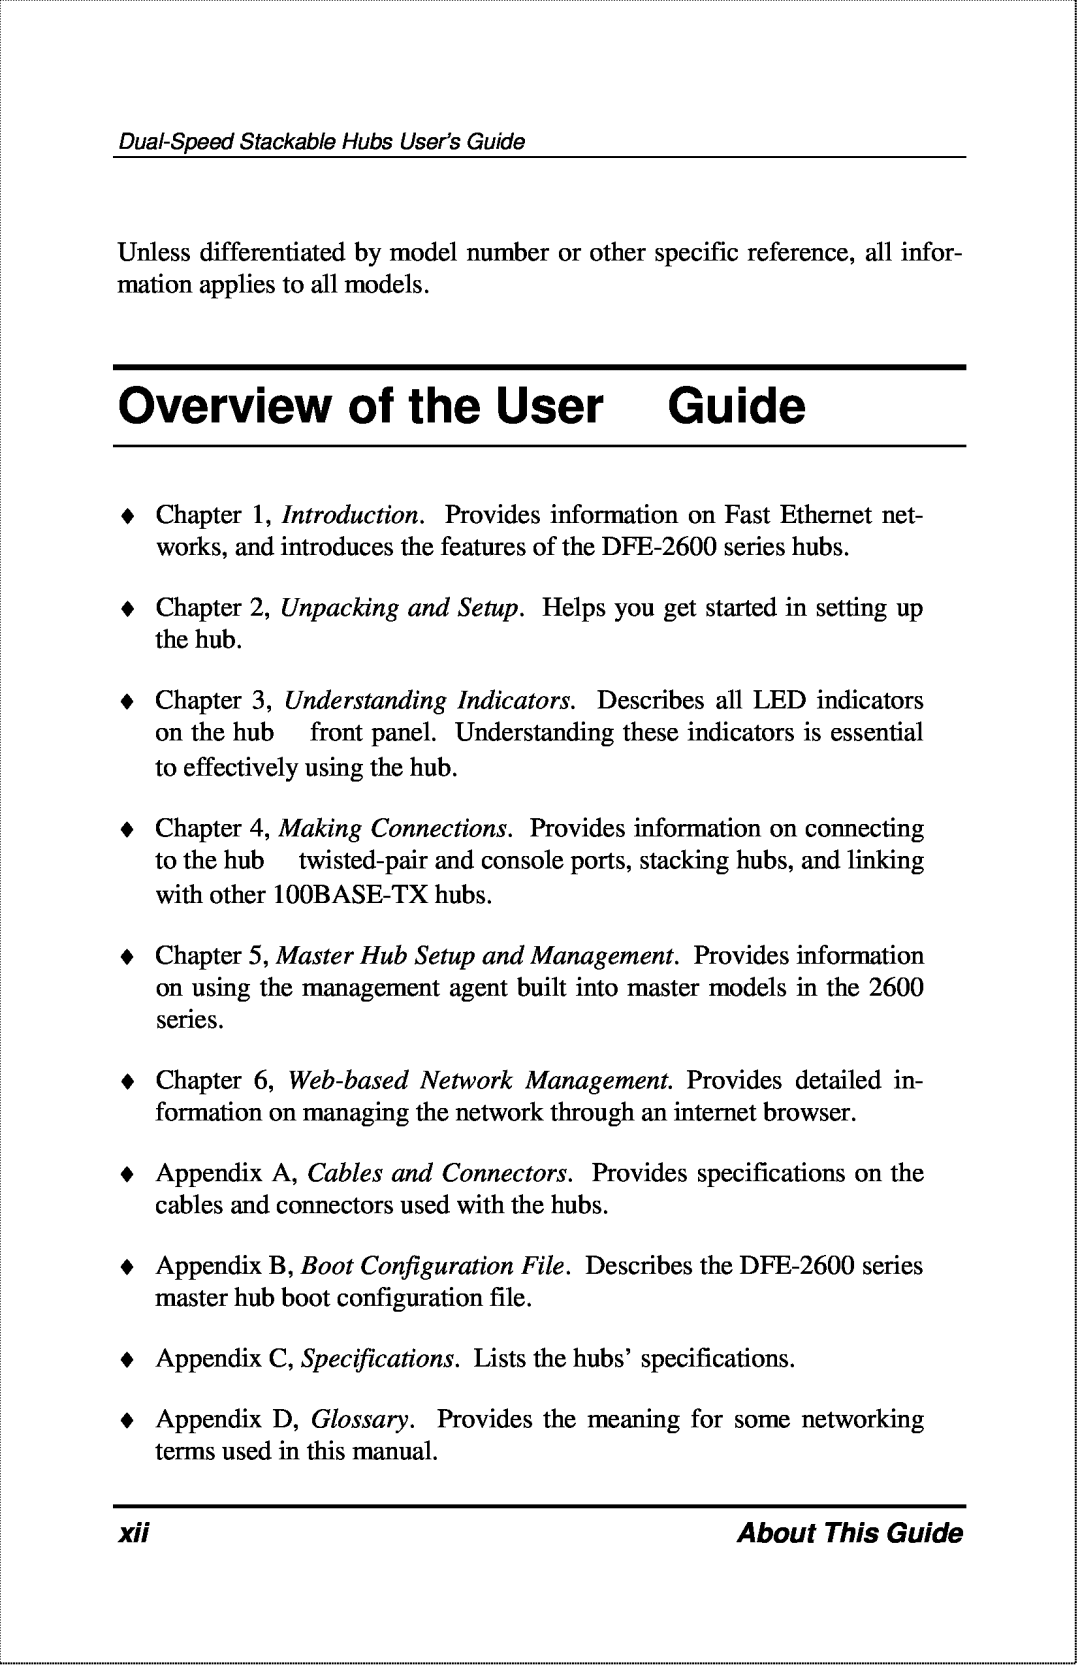 D-Link DFE-2600 manual Overview of the User Guide, About This Guide 